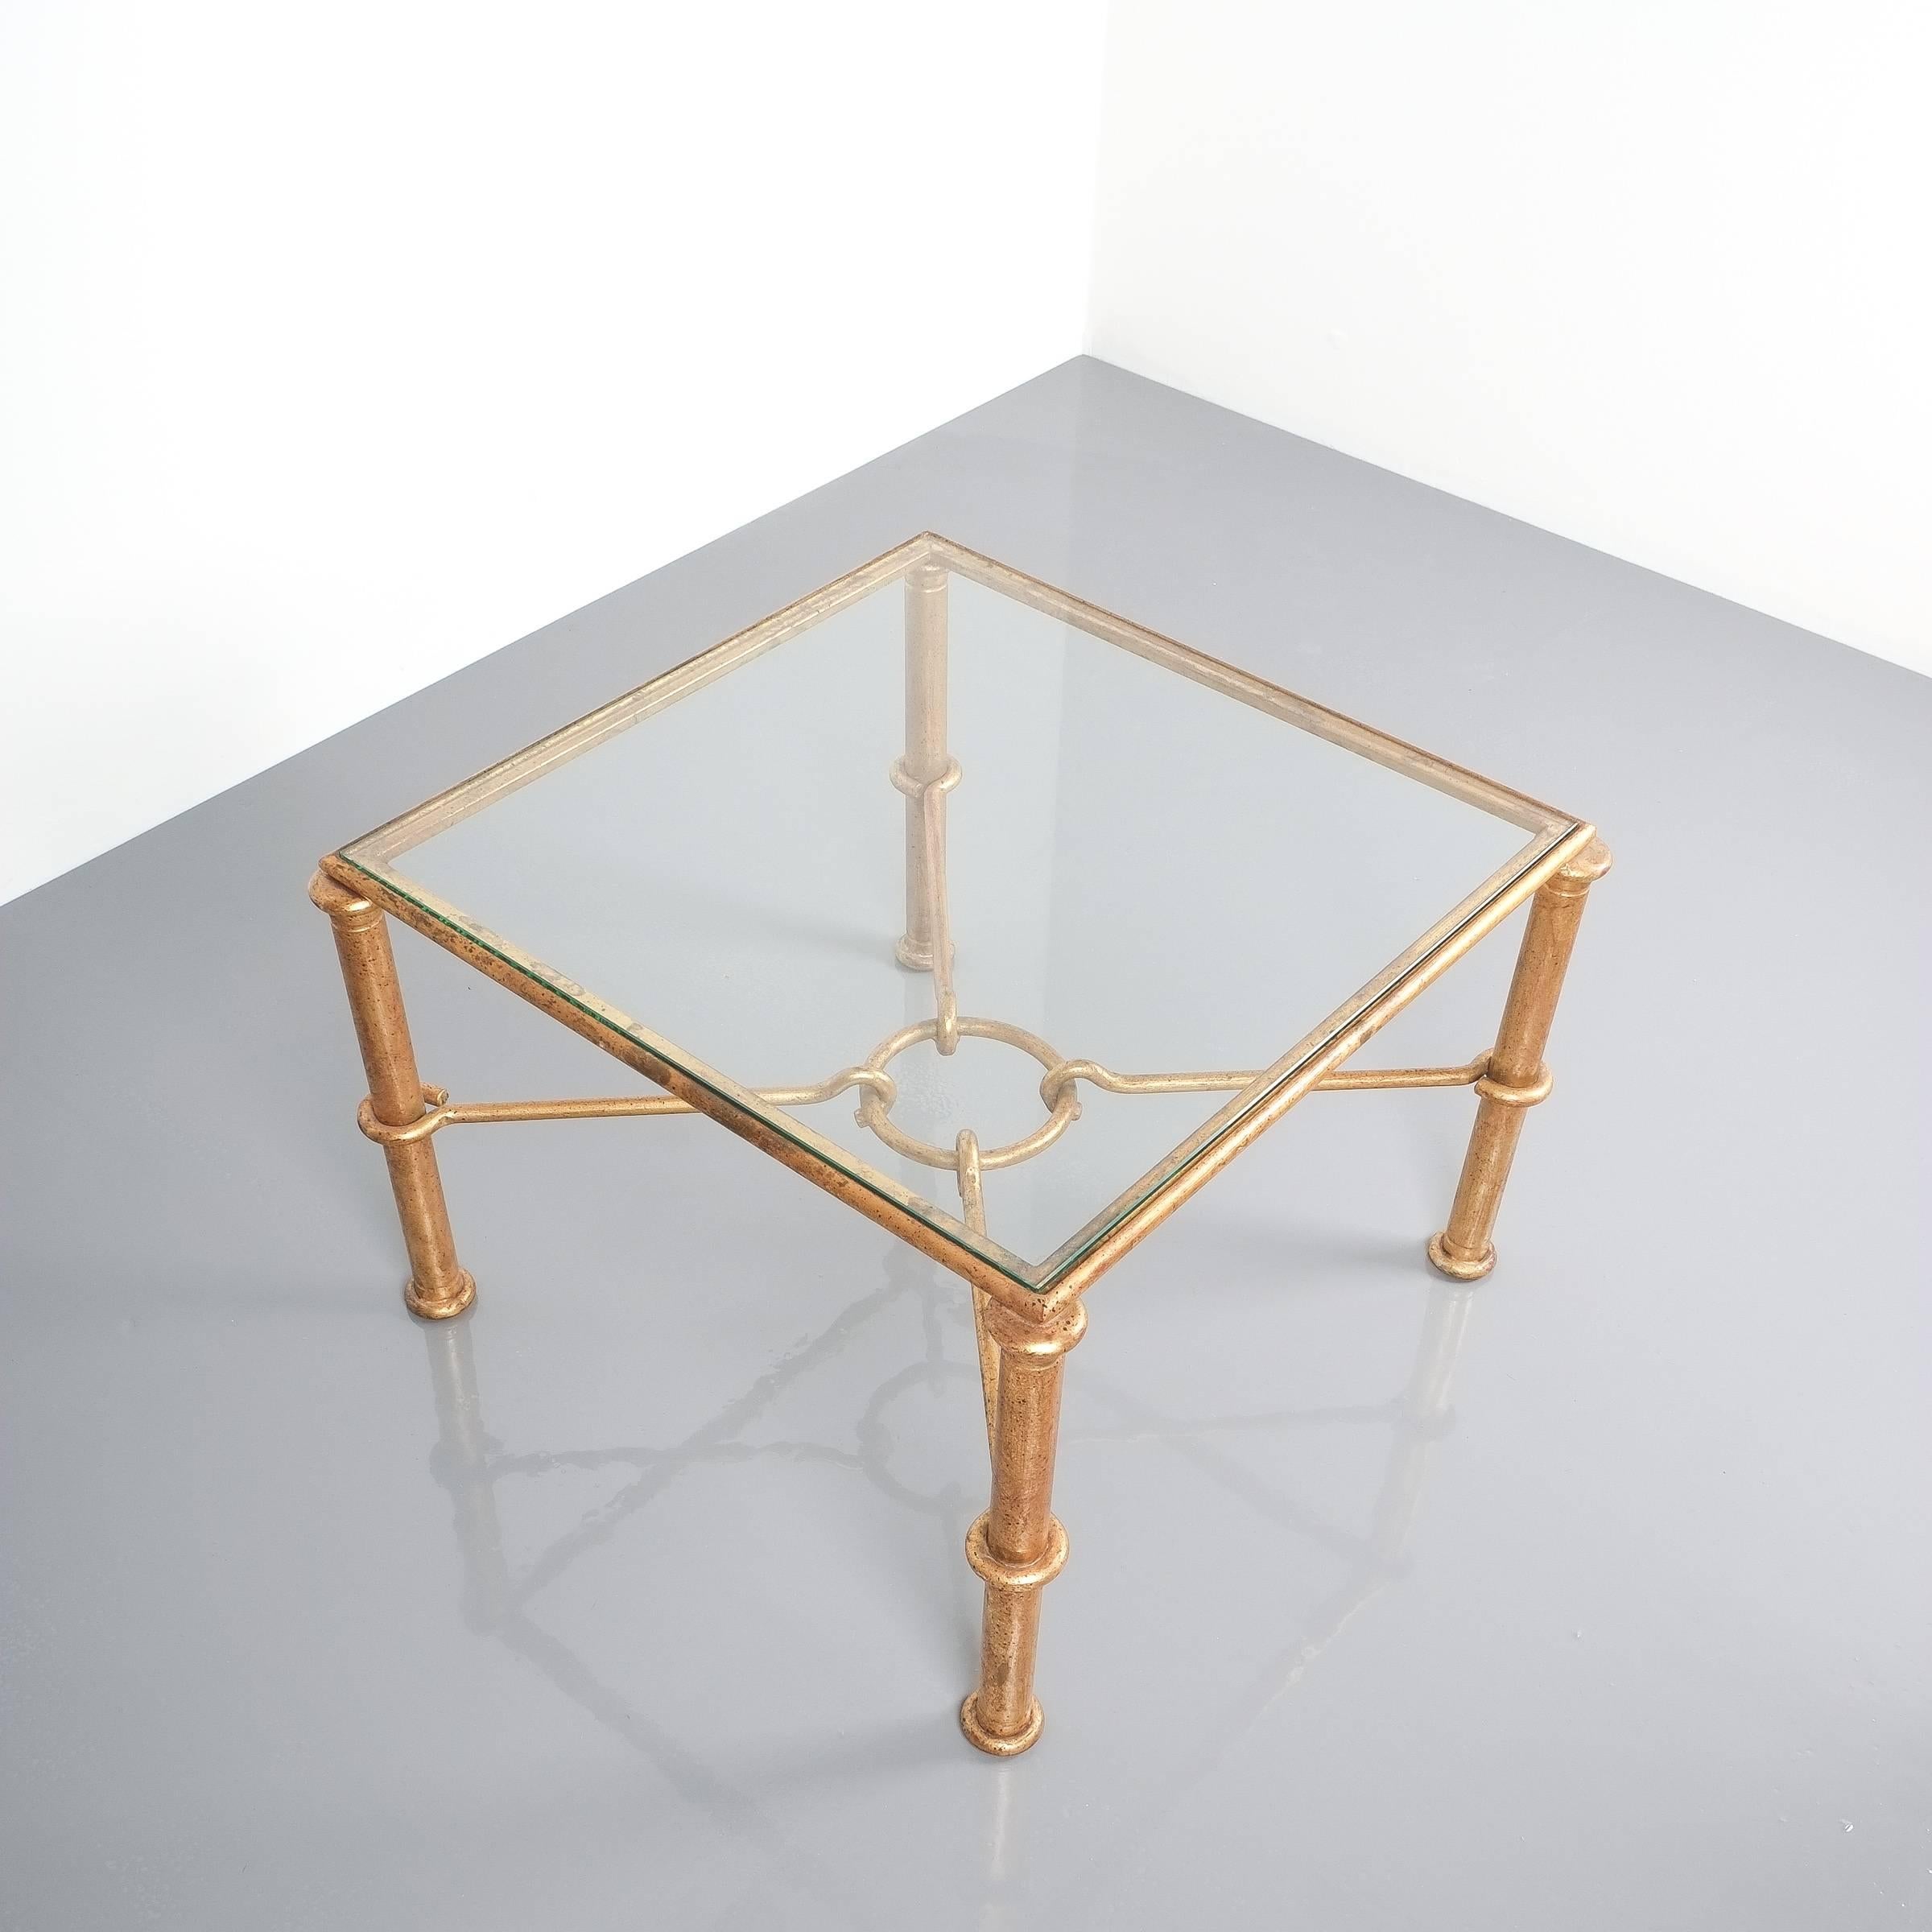 Mid-20th Century Rene Drouet Attributed Pair of Gilt Iron Side Tables, France, 1950